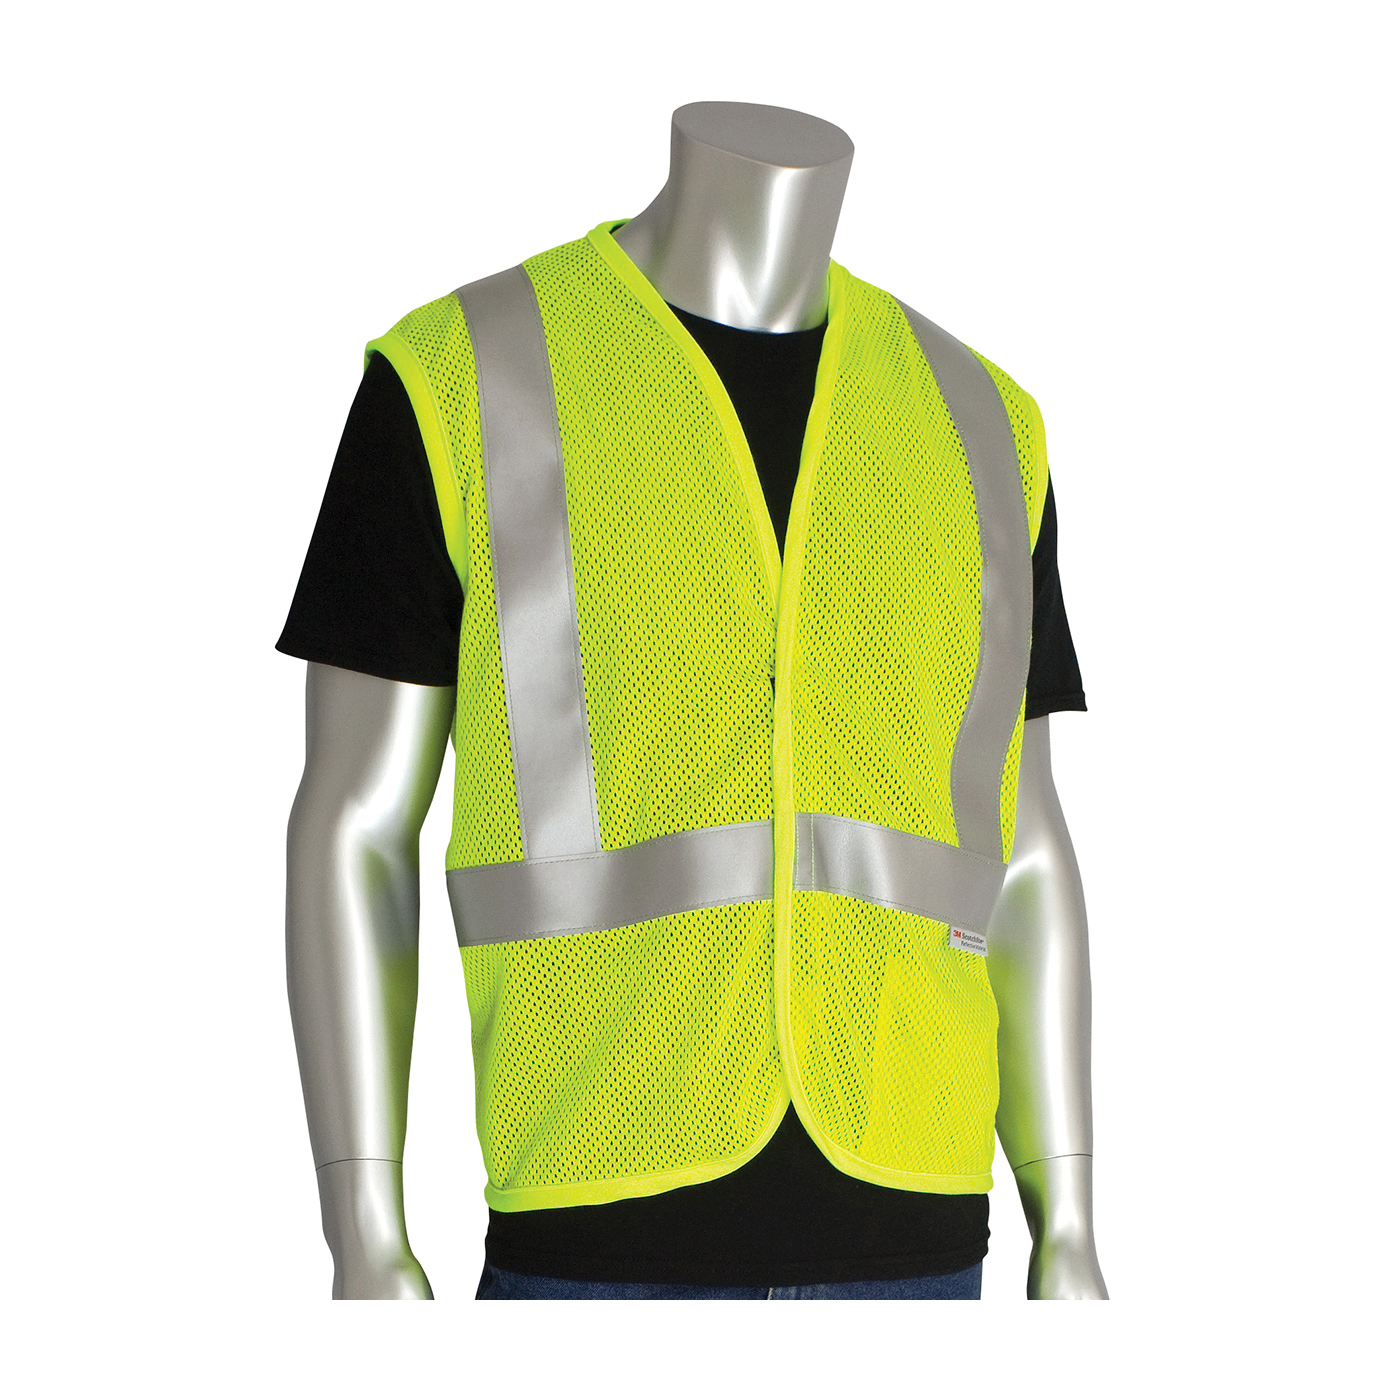 PIP® 305-2100-5X Arc and Flame Resistant Vest, 5XL, Hi-Viz Lime Yellow, Solid GlenGuard® Modacrylic/Aramid Blend Mesh Fabric, Hook and Loop Closure, 1 Pockets, ANSI Class: Class 2, Specifications Met: ANSI 107 Type R